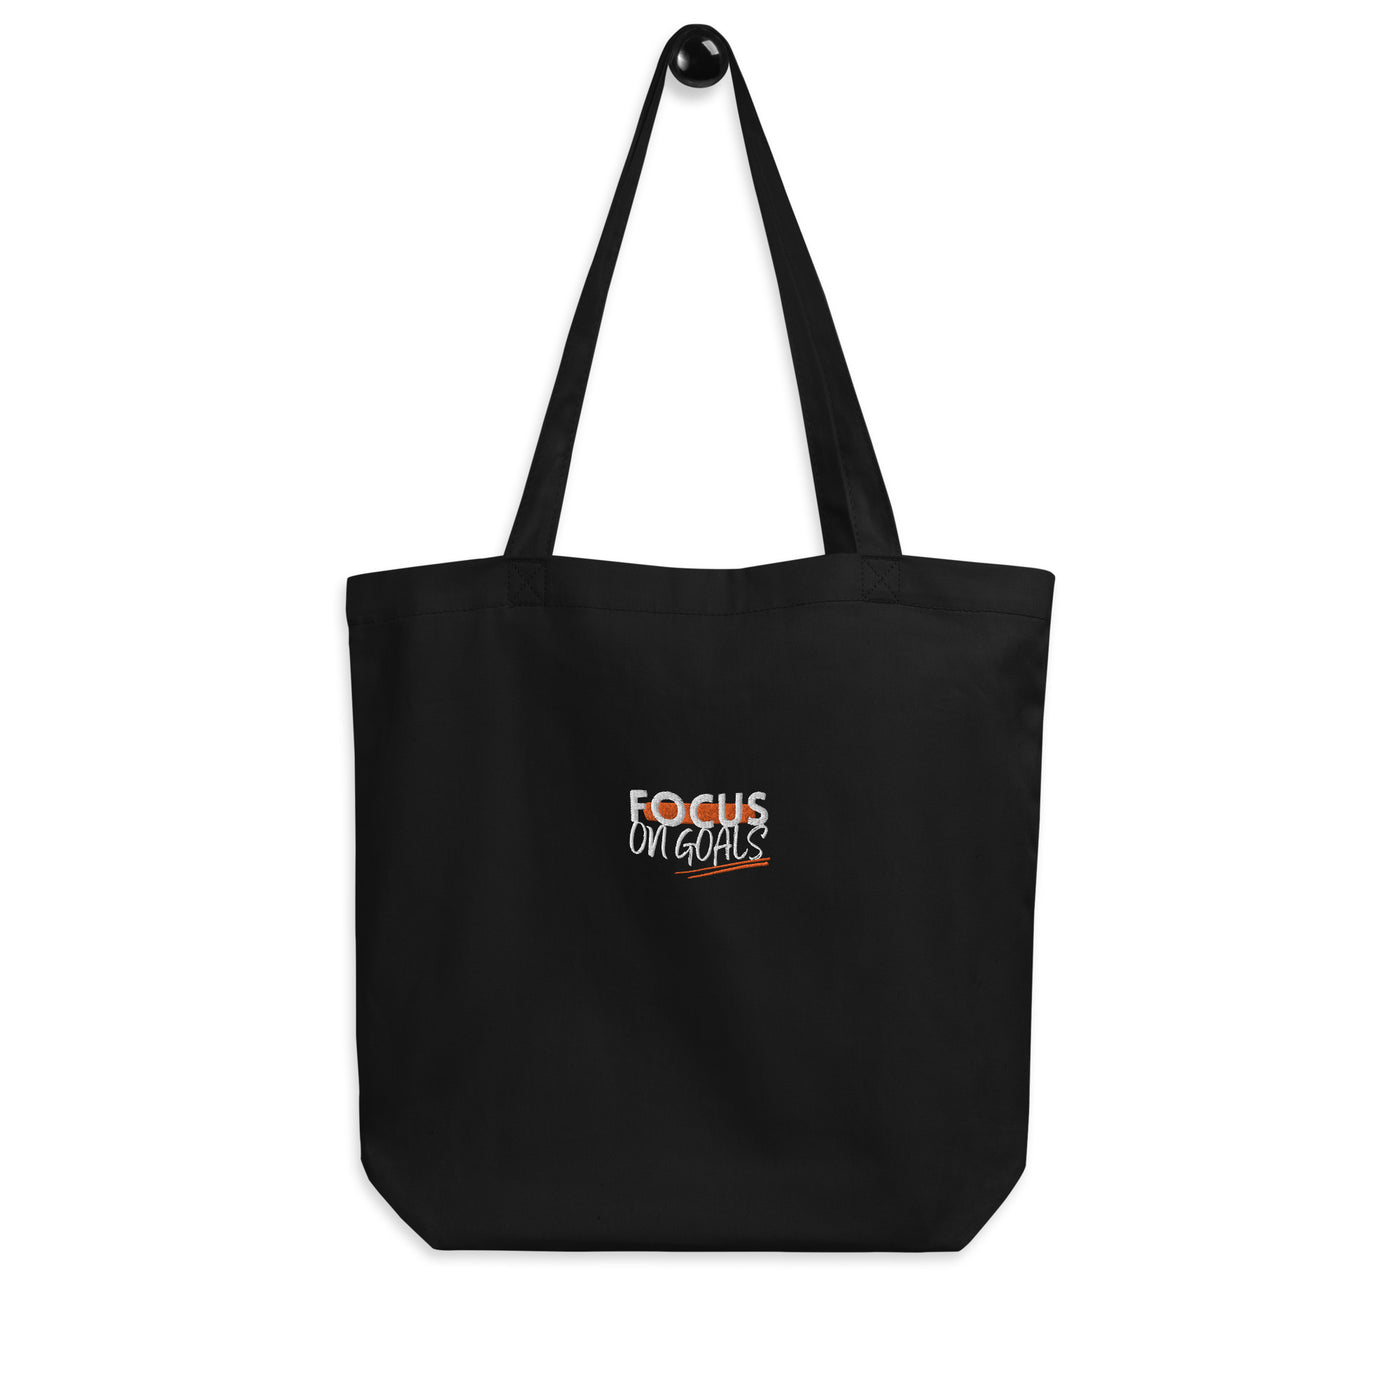 Eco Embroidered Black Tote Bag - Focus on Goals